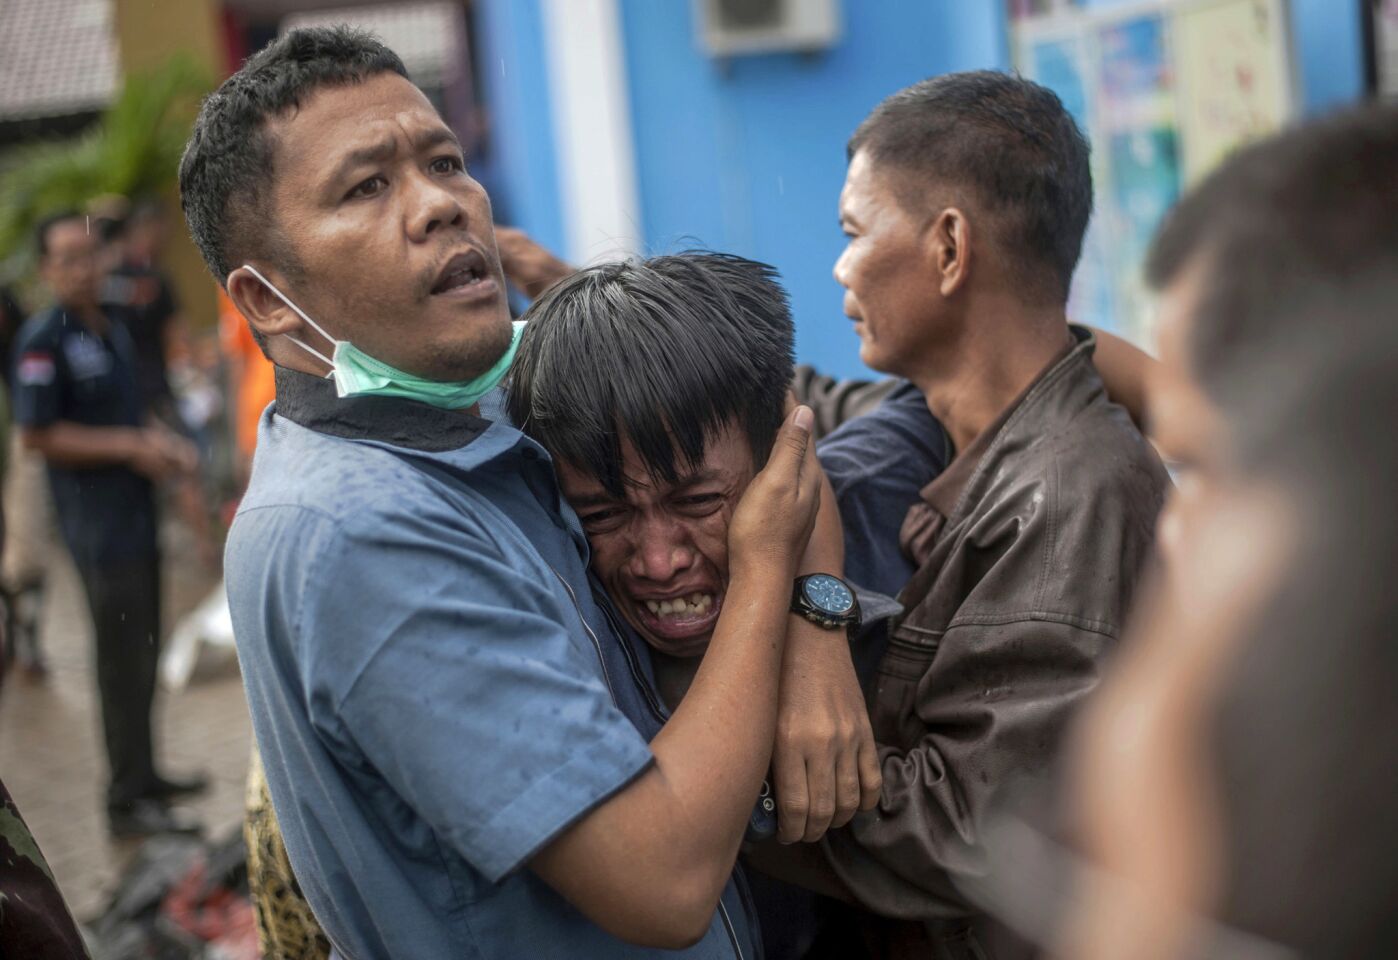 Death toll continues to rise following tsunami in Indonesia